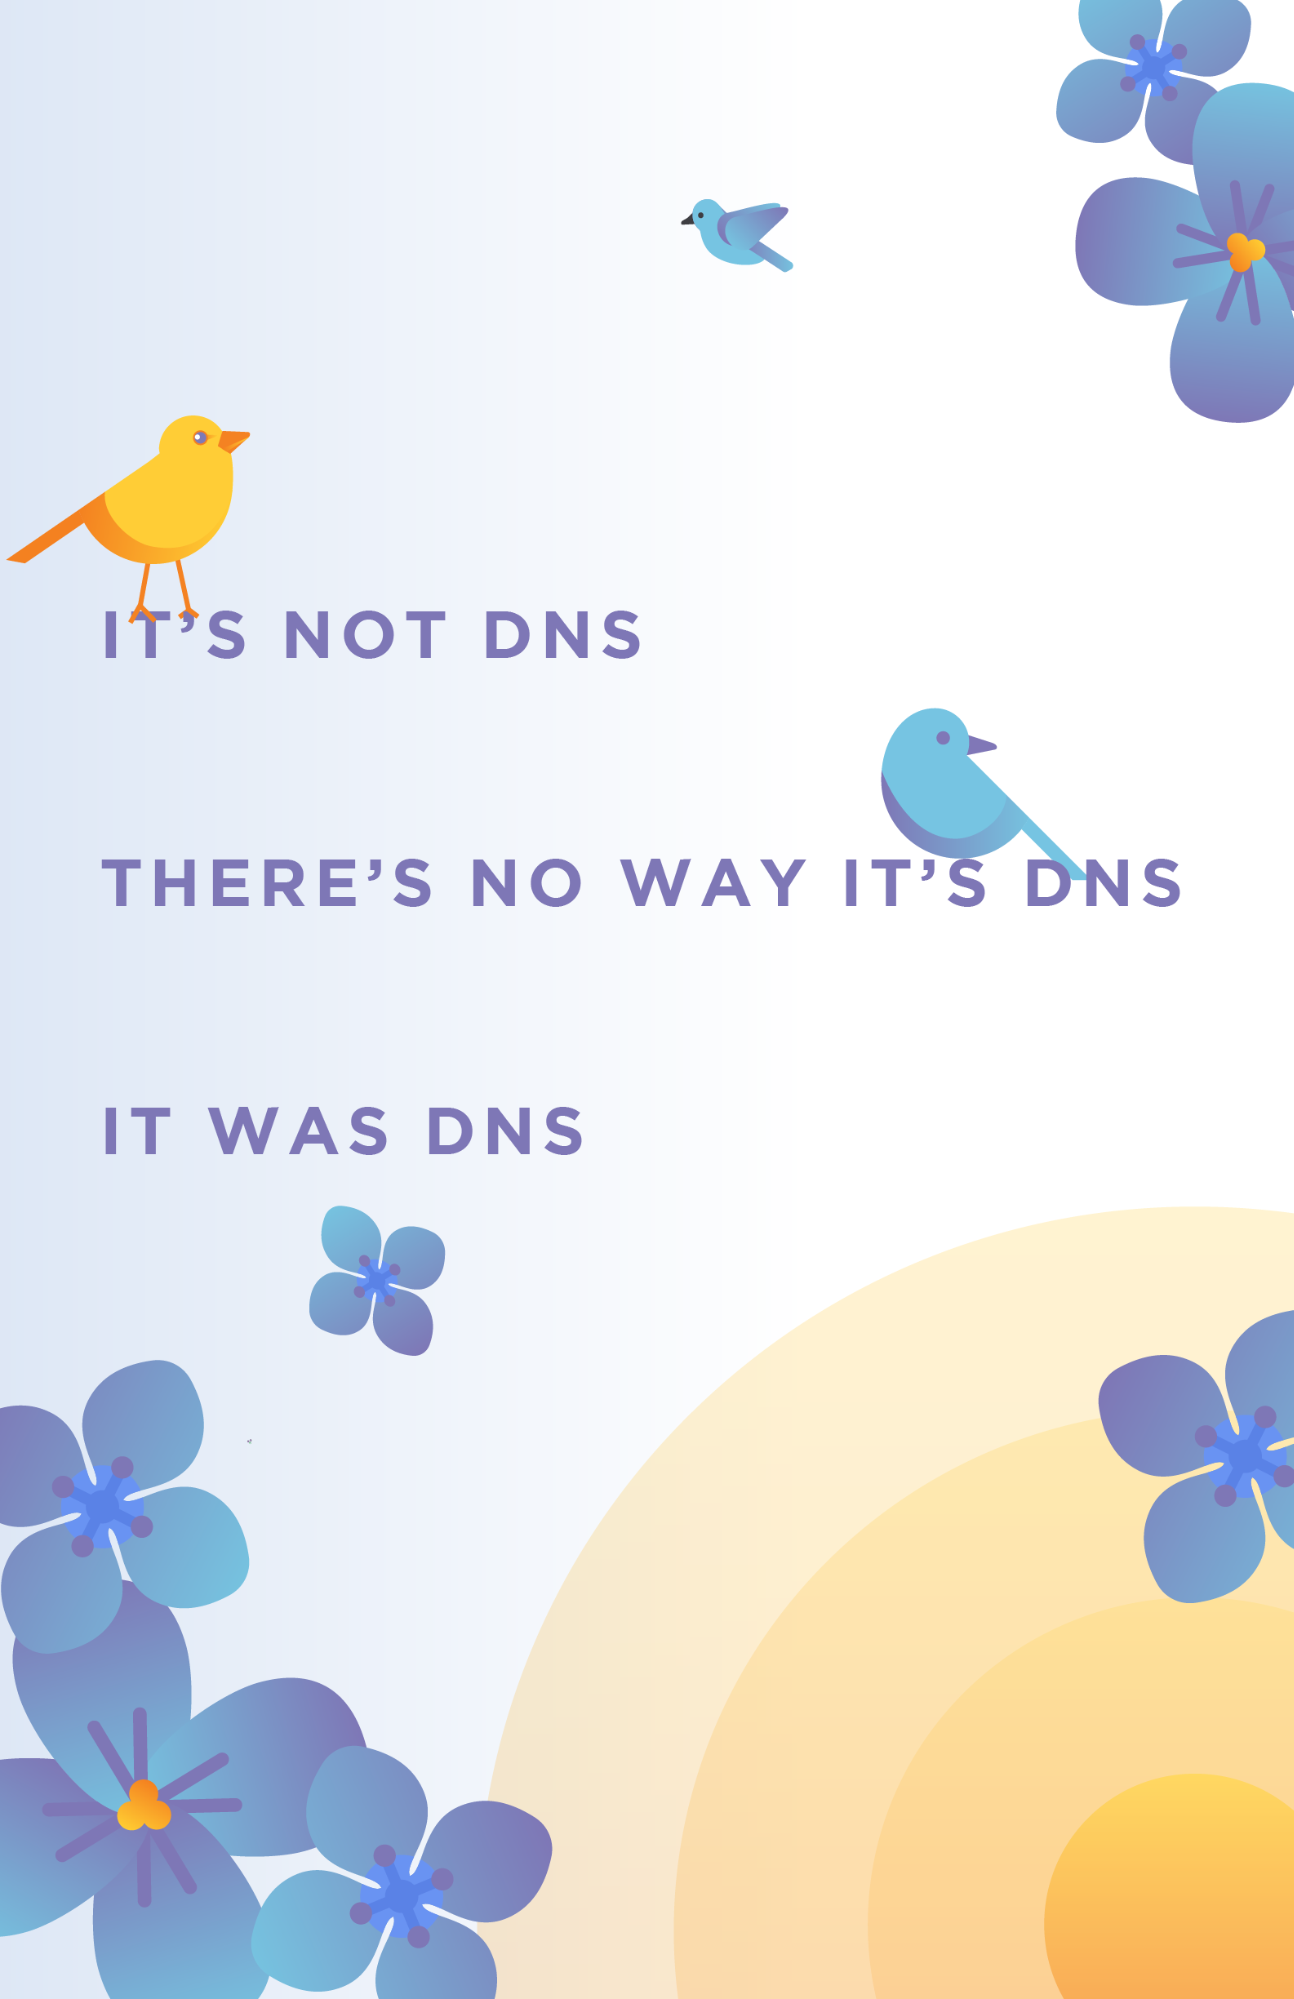 Making DNS record changes more reliable